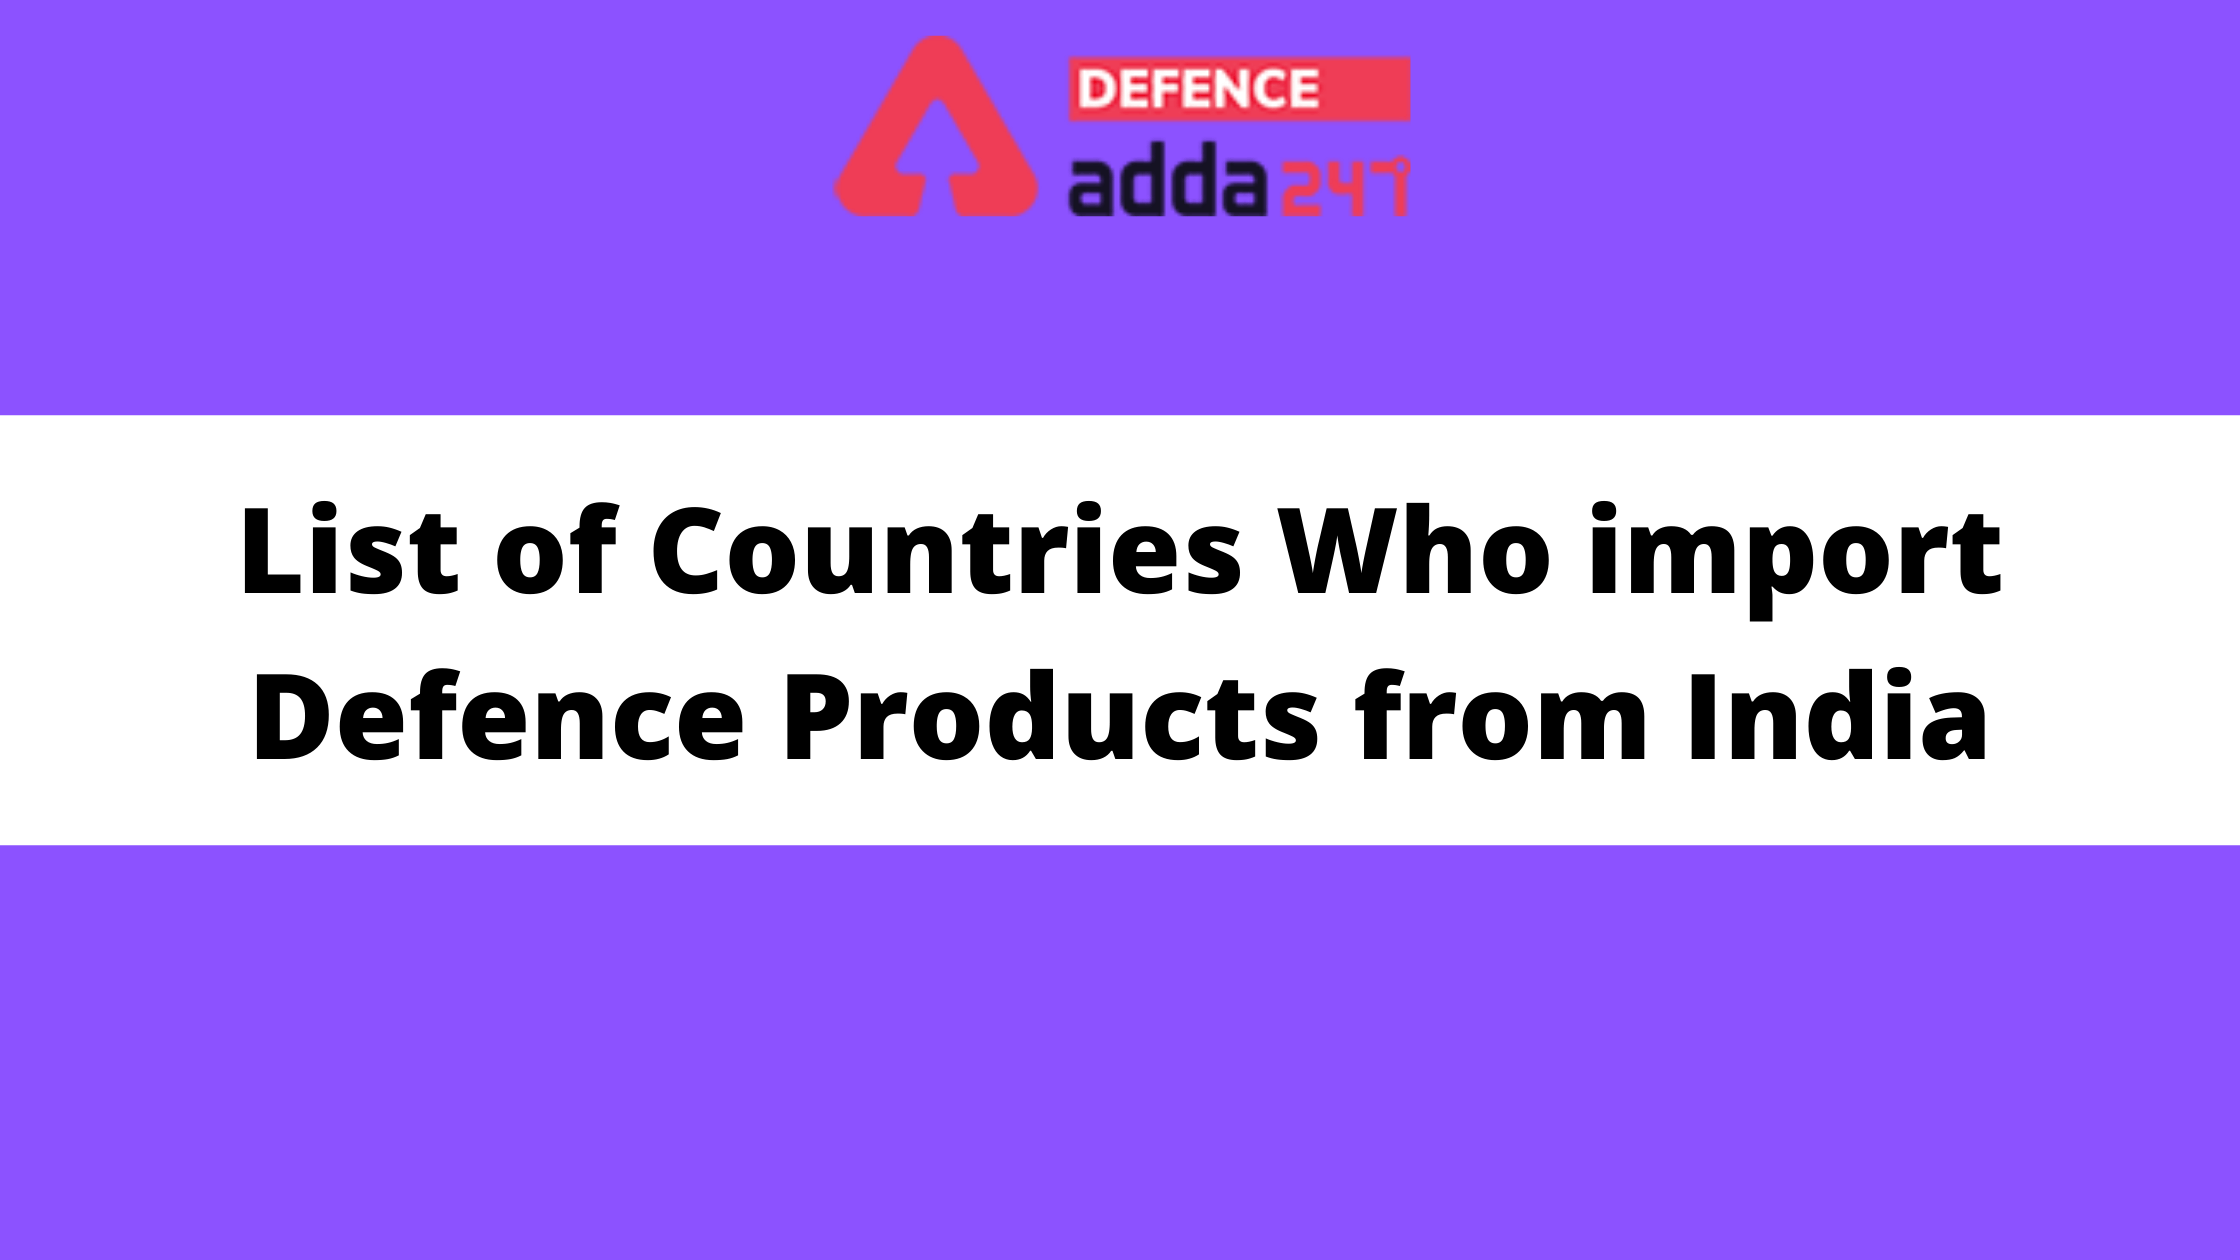 List of Countries Who import Defence Products from India